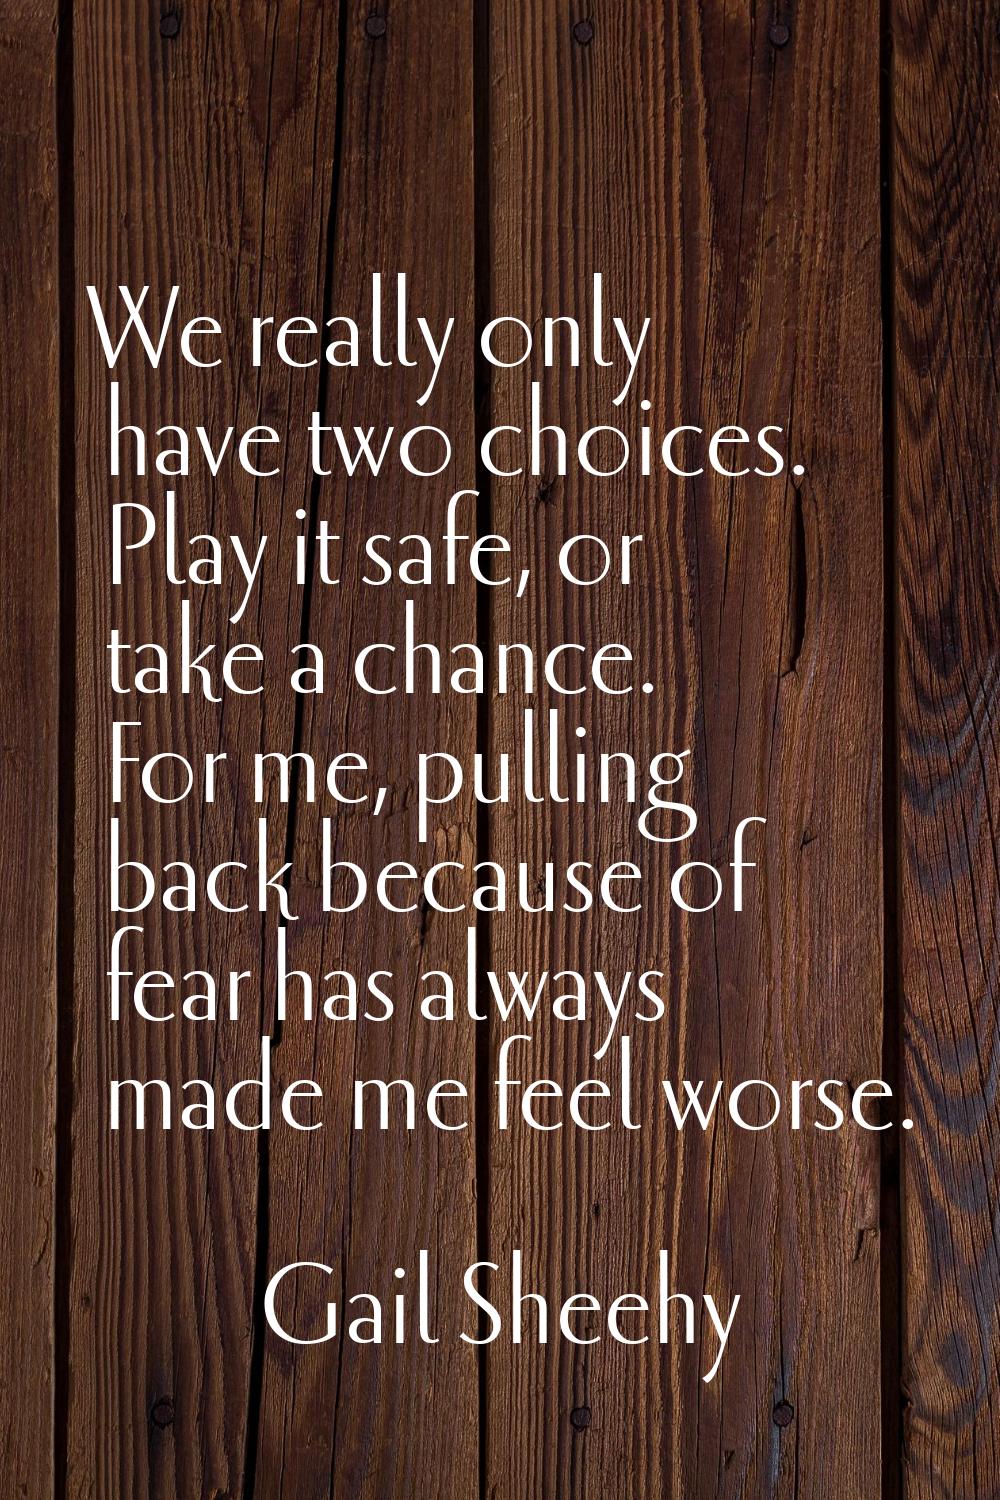 We really only have two choices. Play it safe, or take a chance. For me, pulling back because of fe